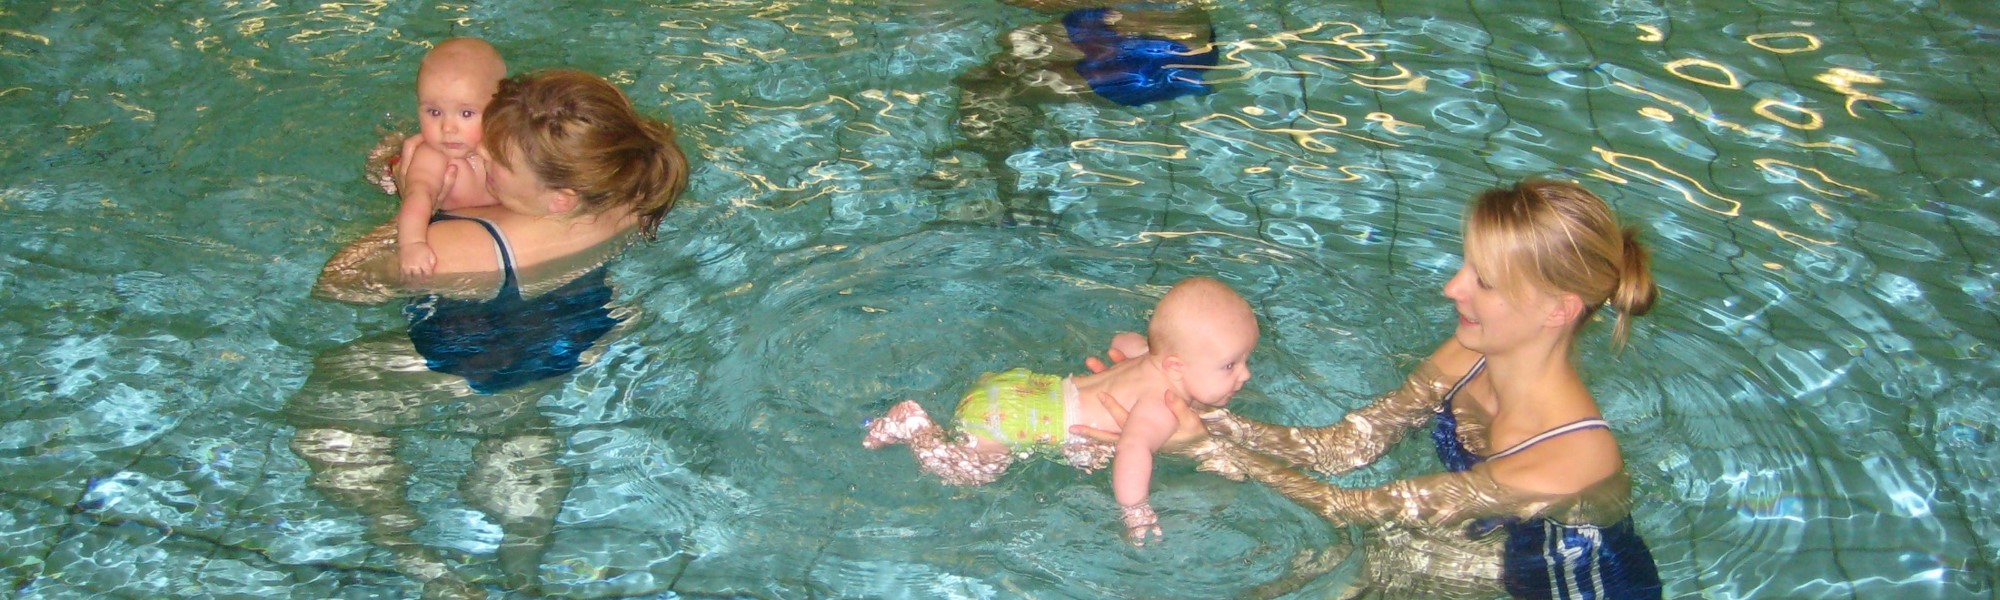 Participants in the water holding a baby in the arm